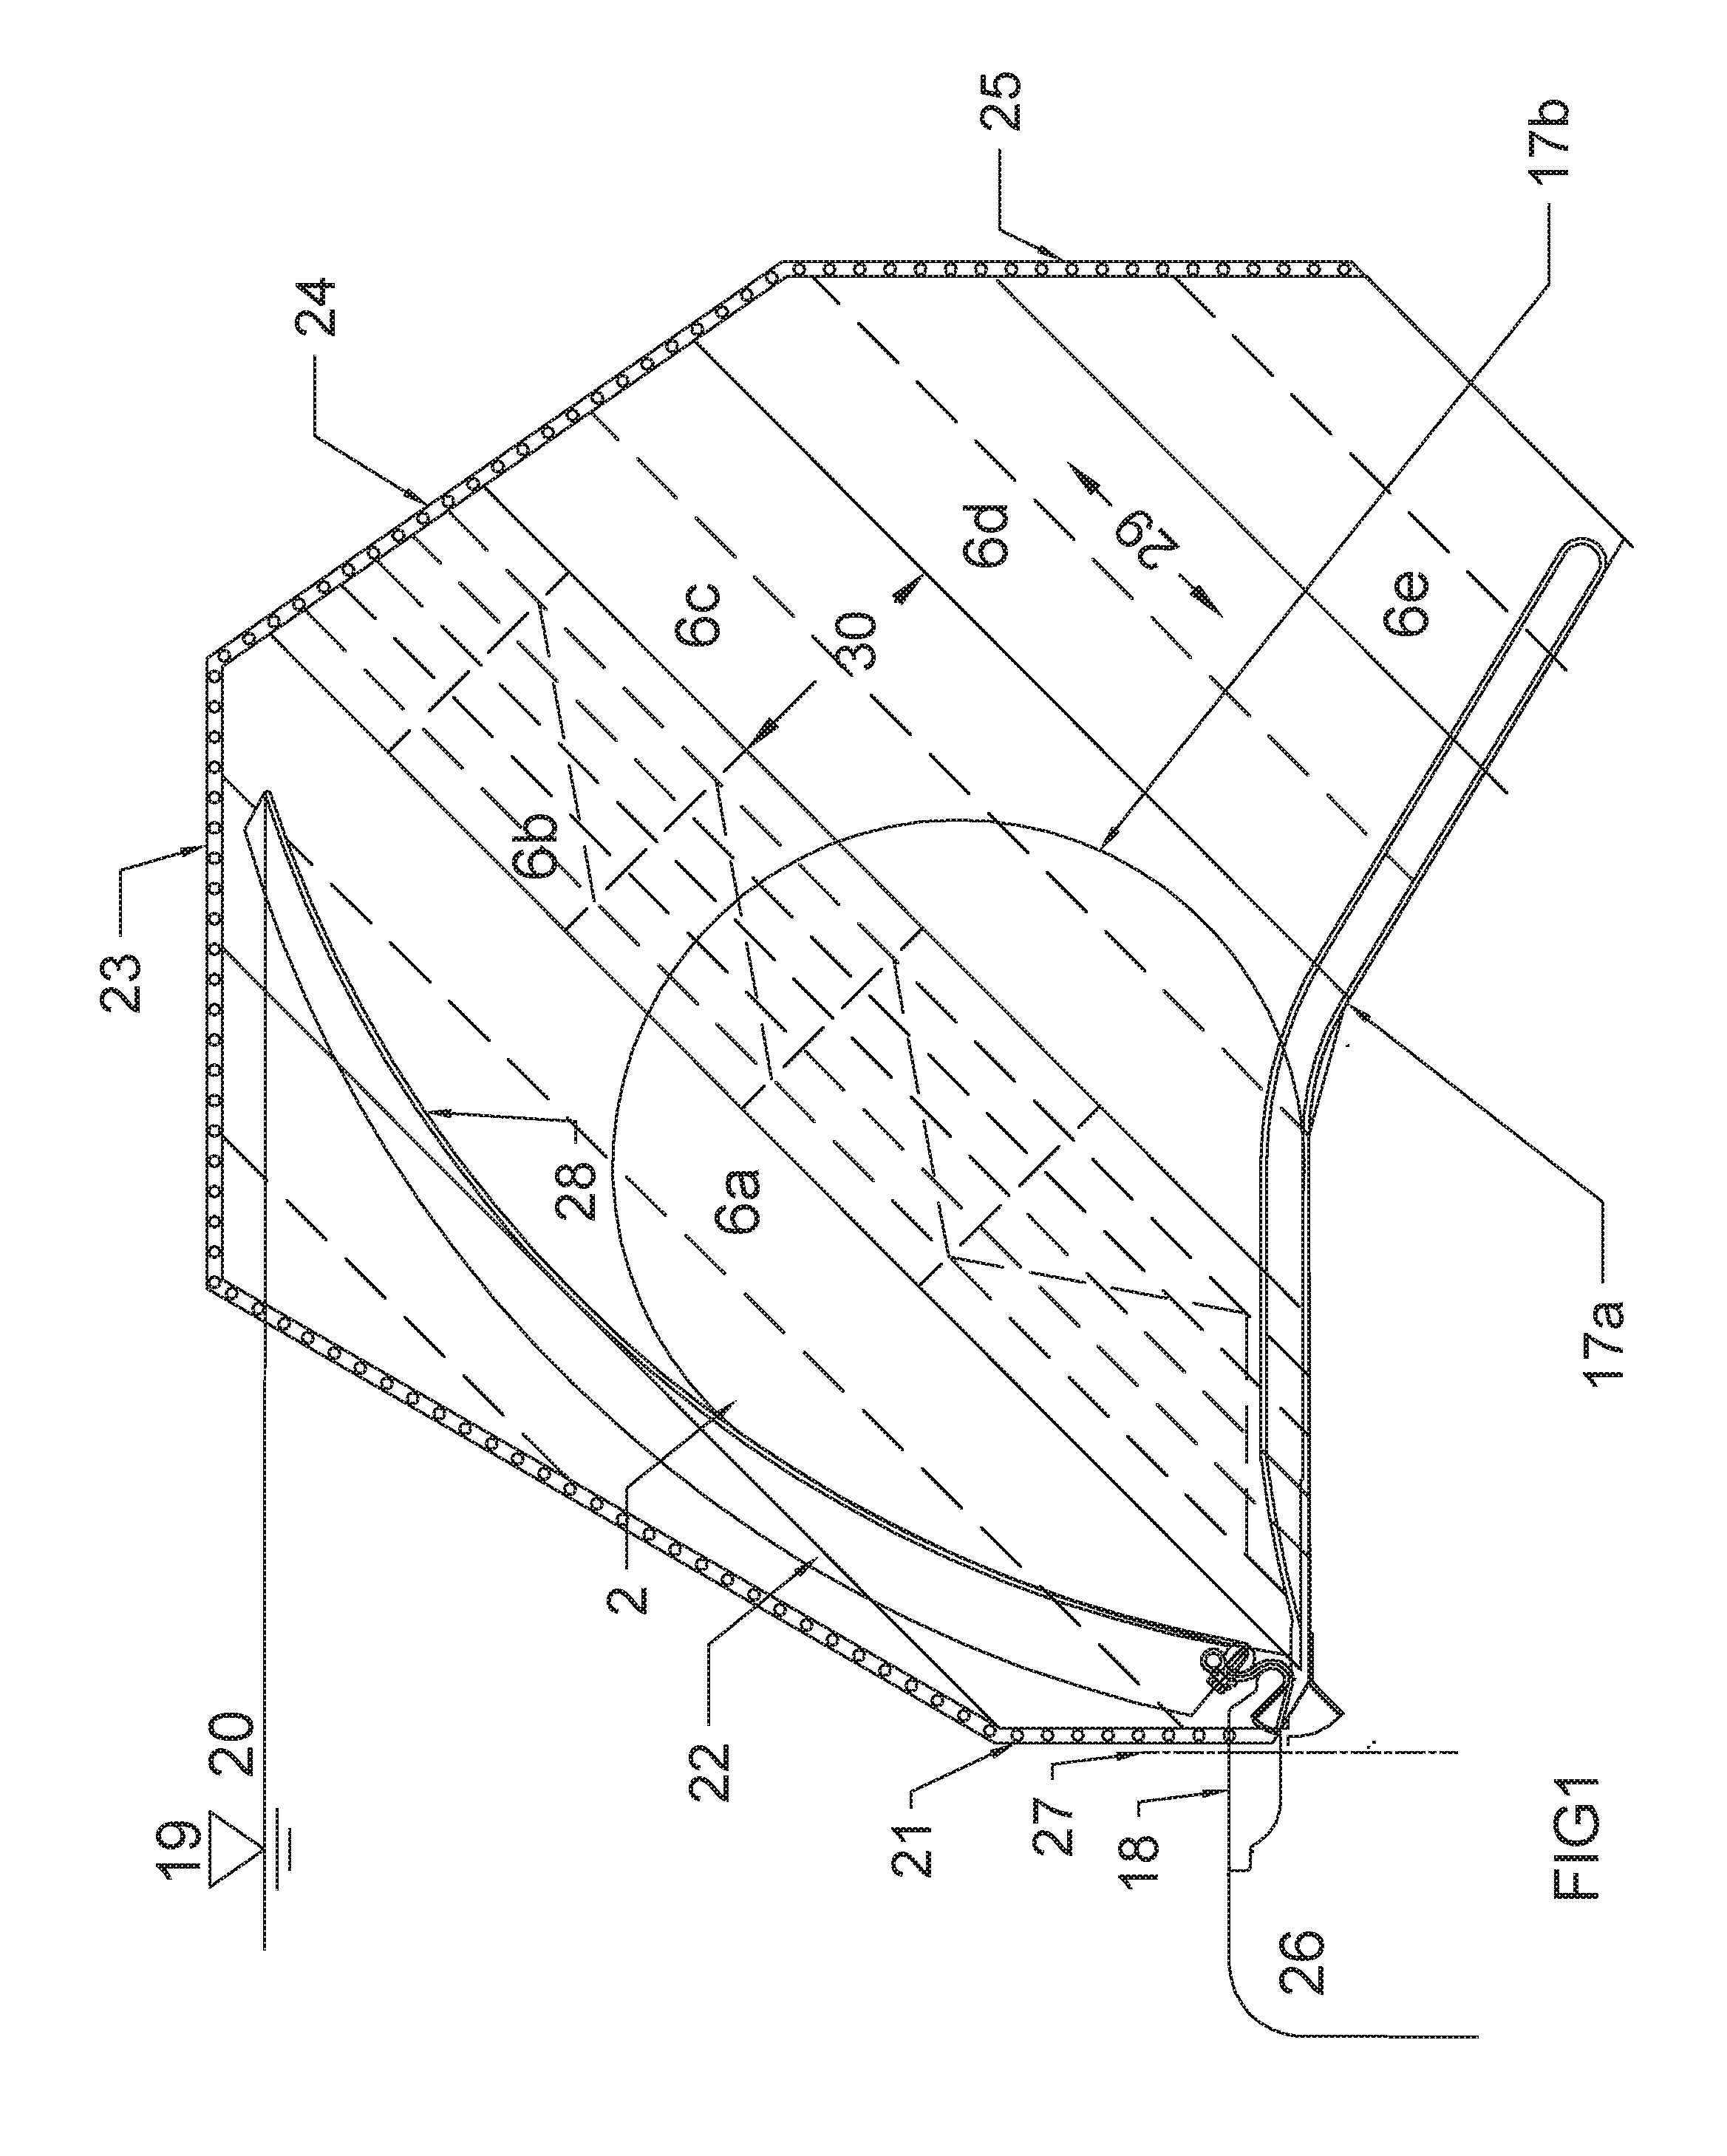 Abutment Plate for Water Control Gate